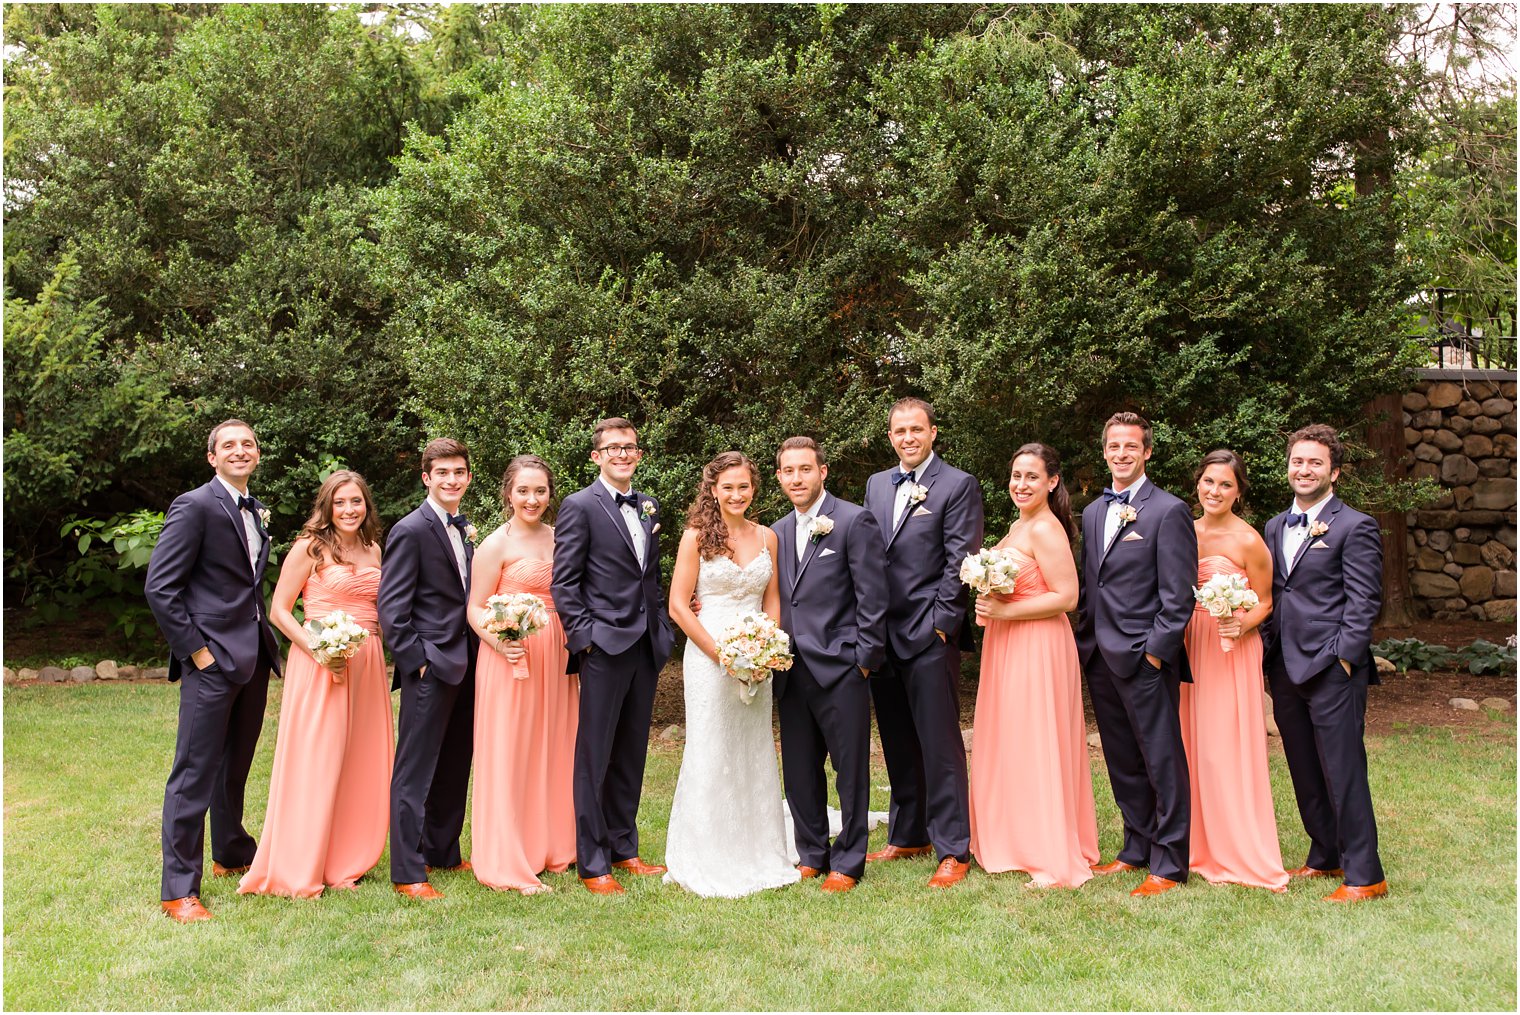 Peach and navy bridal party color palette